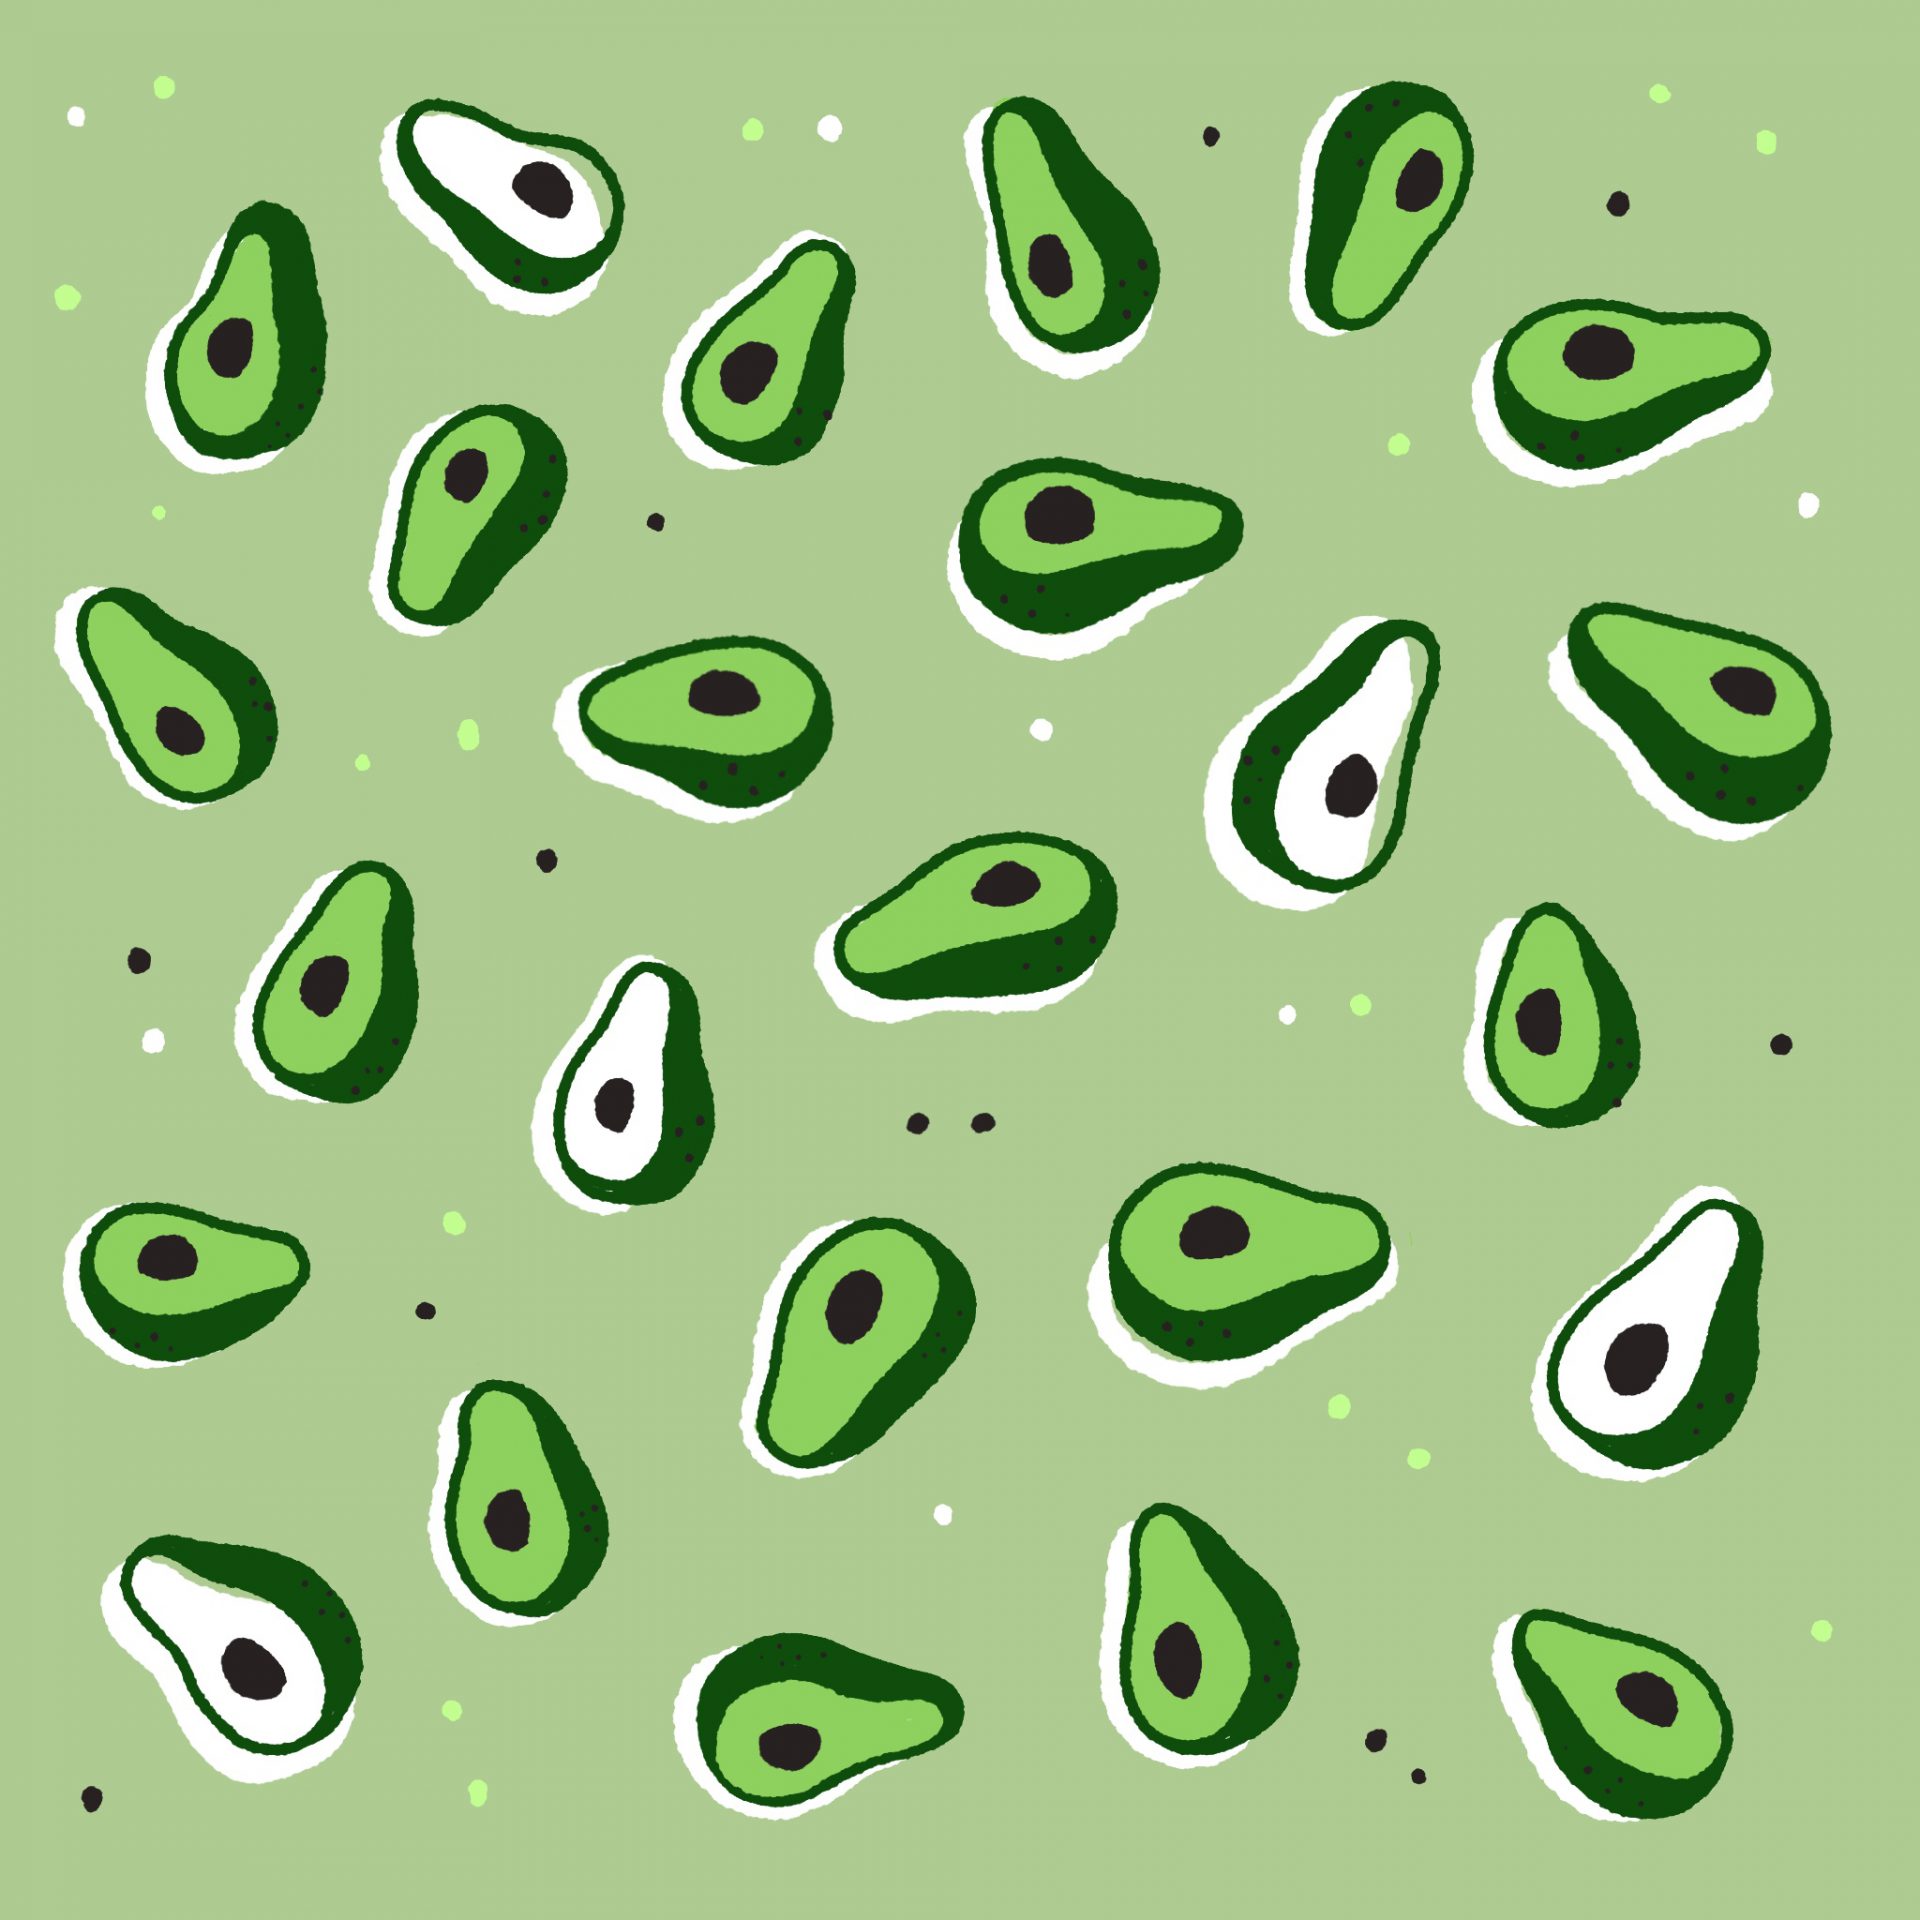 An illustrated pattern of avocados